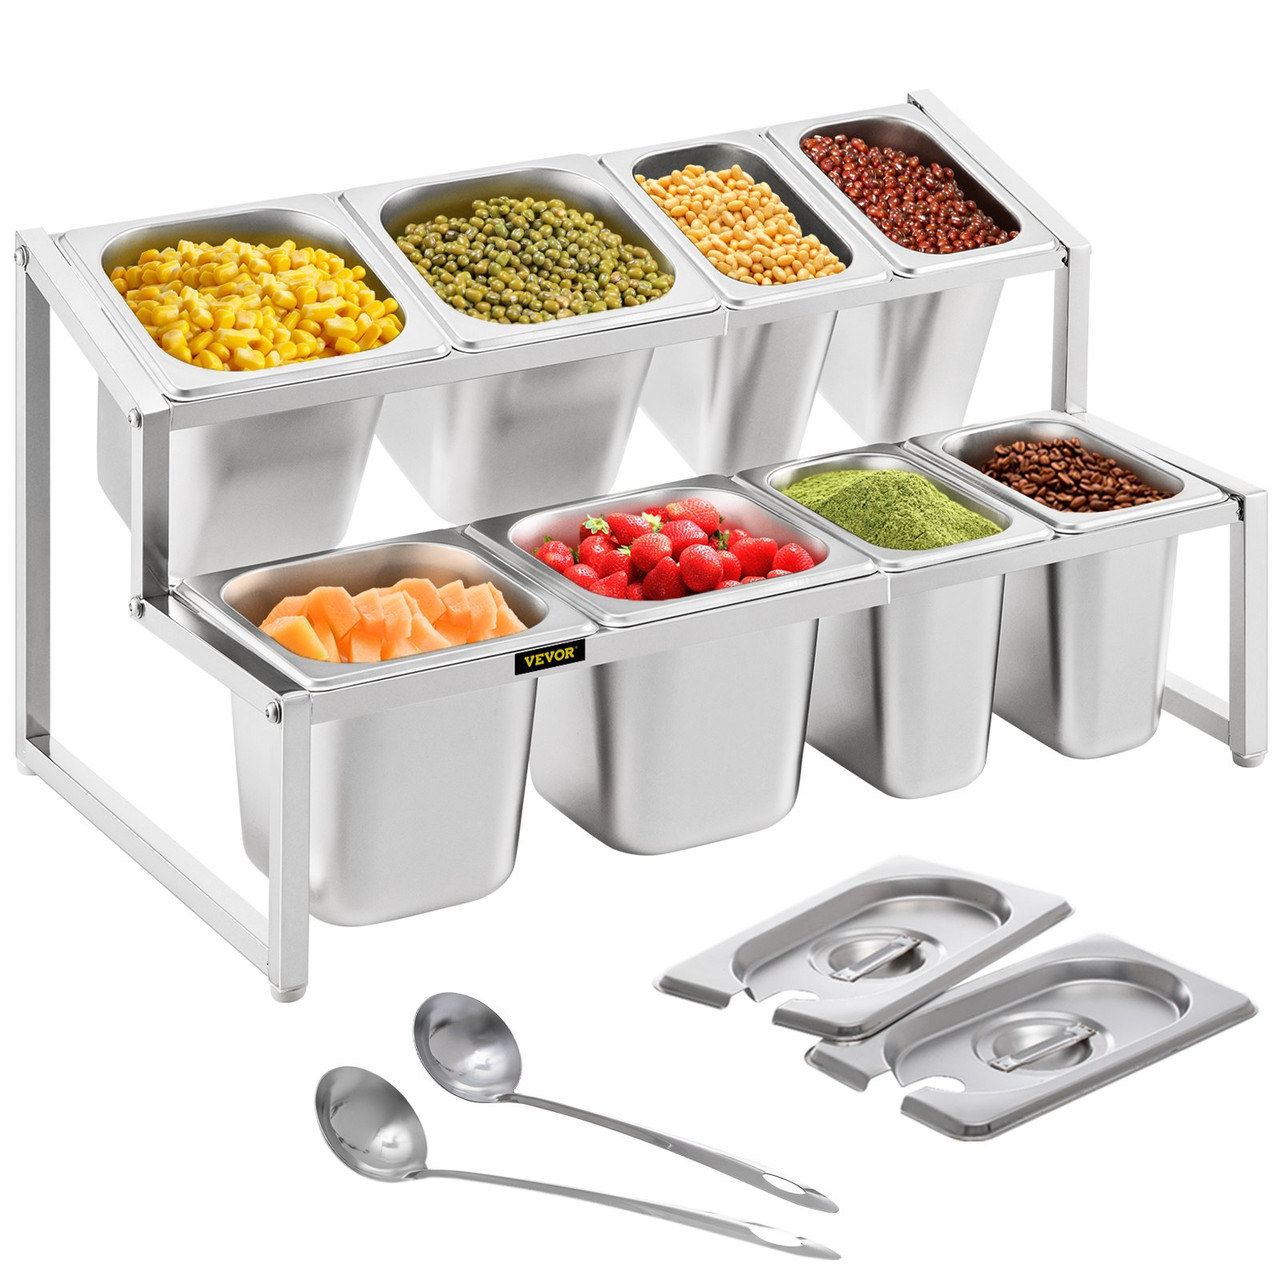 Expandable Spice Rack, 13.8"-23.6" Adjustable, 2-Tier Stainless Steel Organizer Shelf with 4 1/9 Pans 4 1/6 Pan 8 Ladles, Countertop Inclined Holder for Sauce Ingredients Fruits, for Kitchen Use